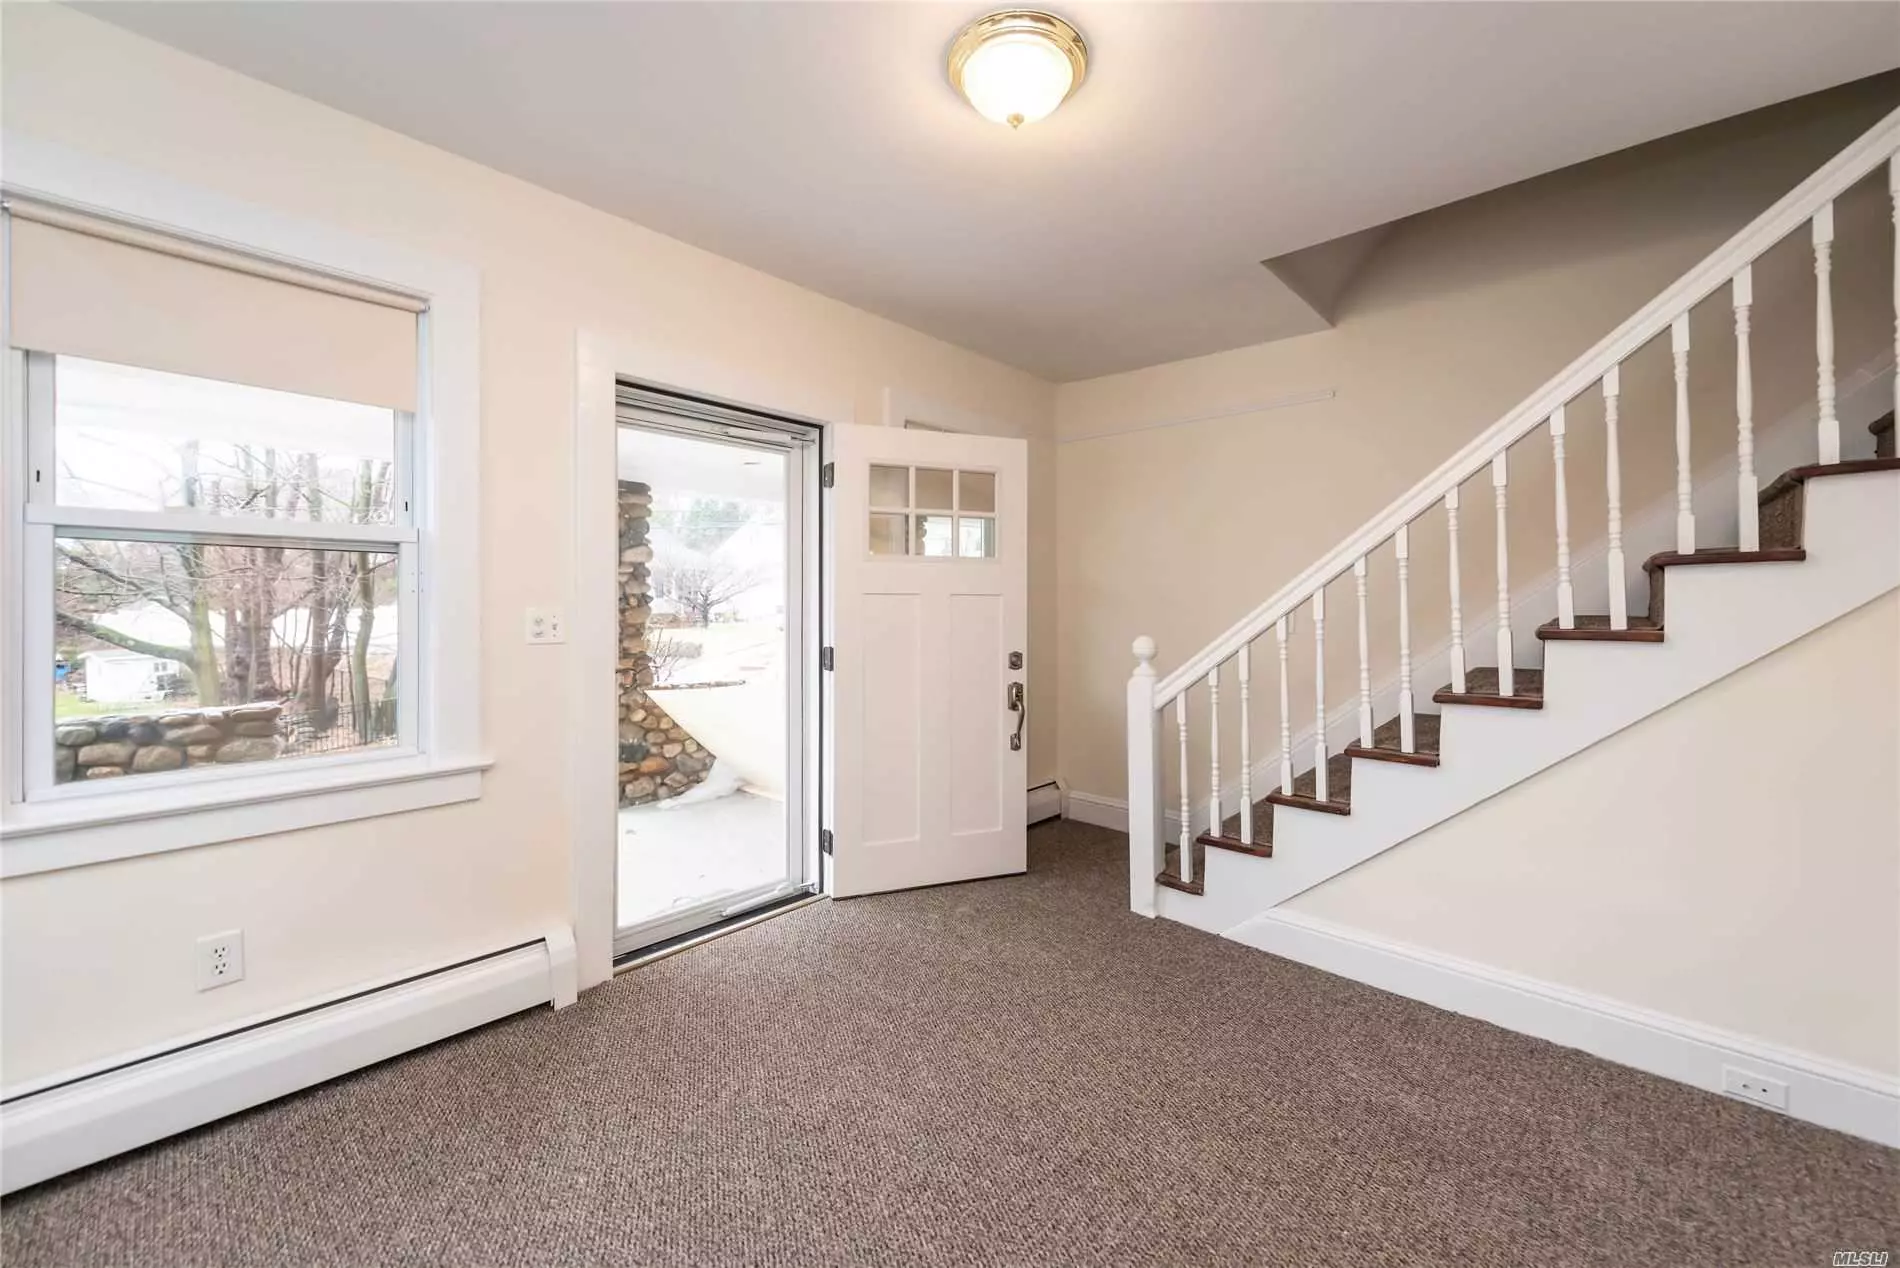 UPDATED LARGE 2/3 BEDROOM RENTAL. HIGH CEILINGS AND 4 FLOORS.TONS OF STORAGE. FULL BASEMENT EQUIPPED WITH WASHER/DRIER AND 2ND REFRIGERATOR/FREEZER FOR YOUR GATHERINGS. SUPER CLOSE TO TOWN, TRAIN AND SHOPPING.